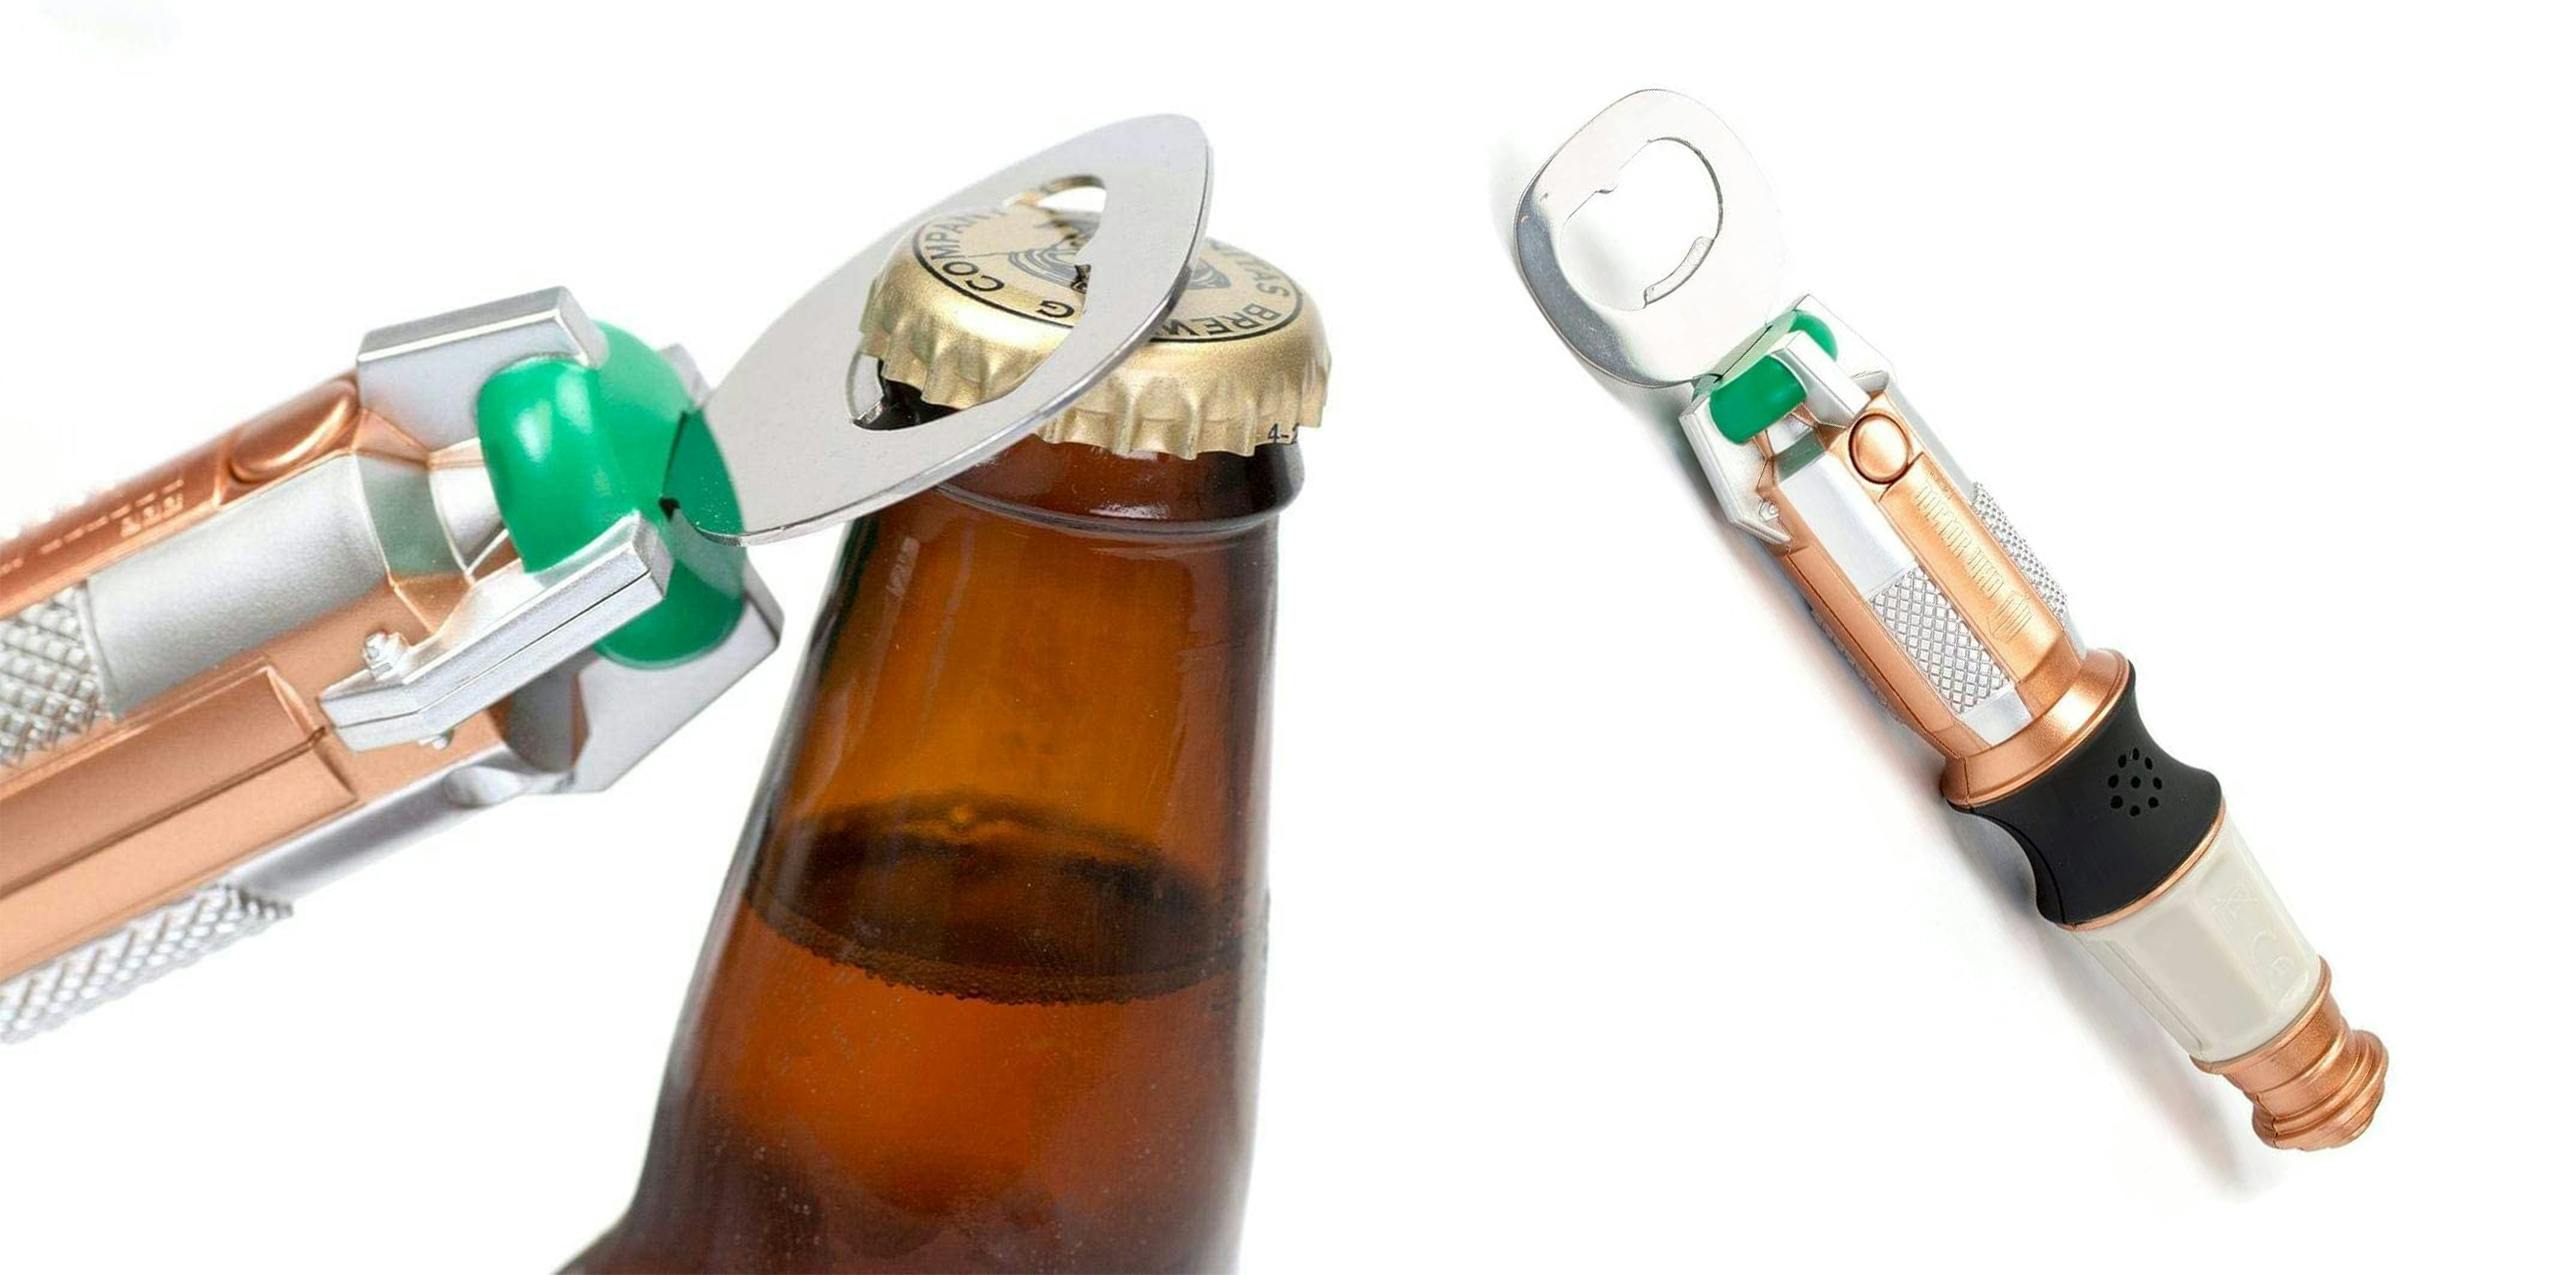 The Dr. Who Sonic Screwdriver bottle opener used to open a bottle makes a great gift for nerds.